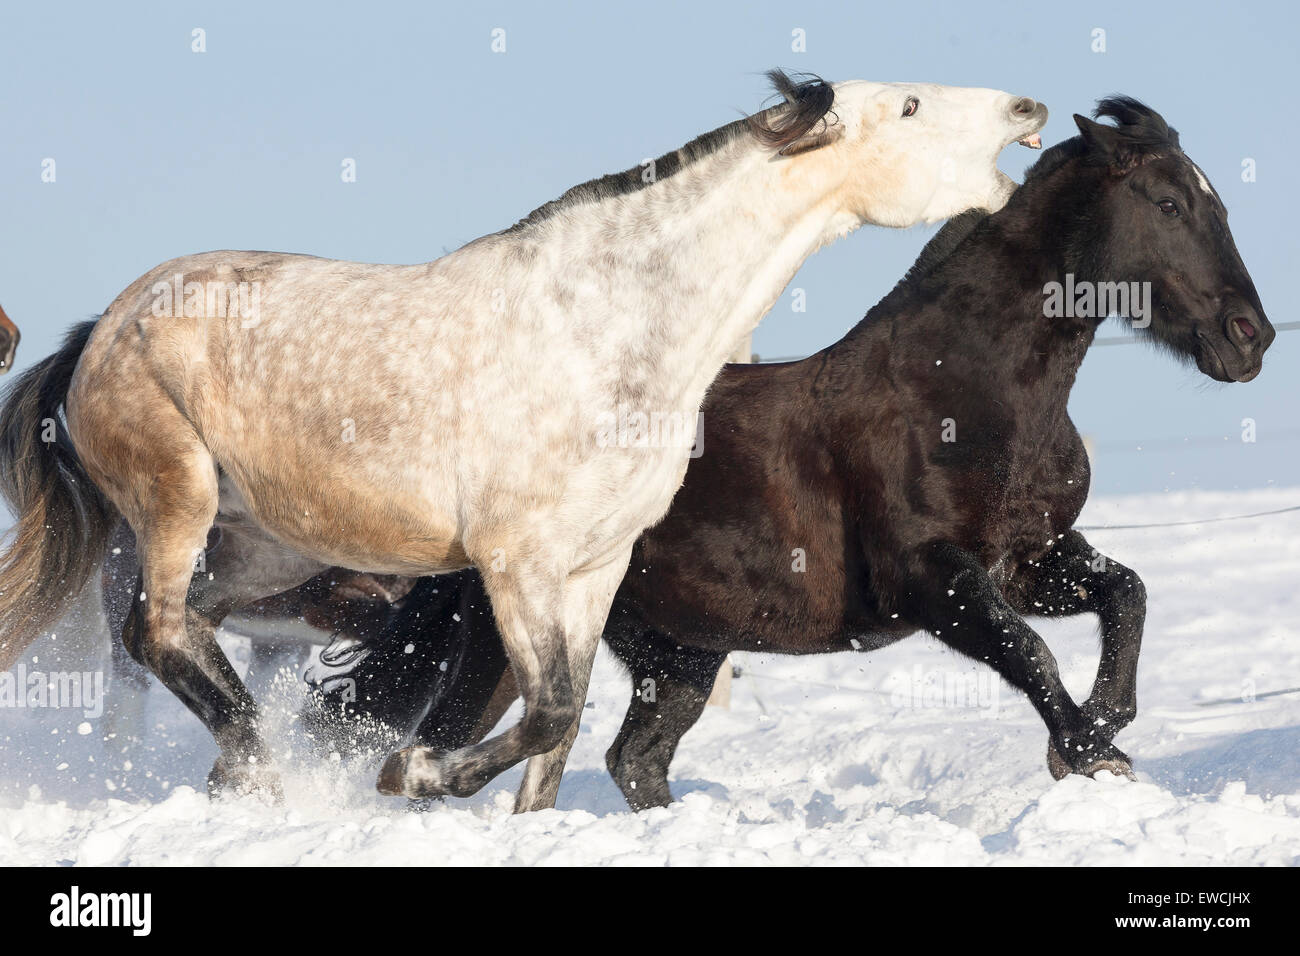 Pure Spanish Horse, Andalusian. Gray horse on a snowy pasture trying to bite a black one. Germany Stock Photo